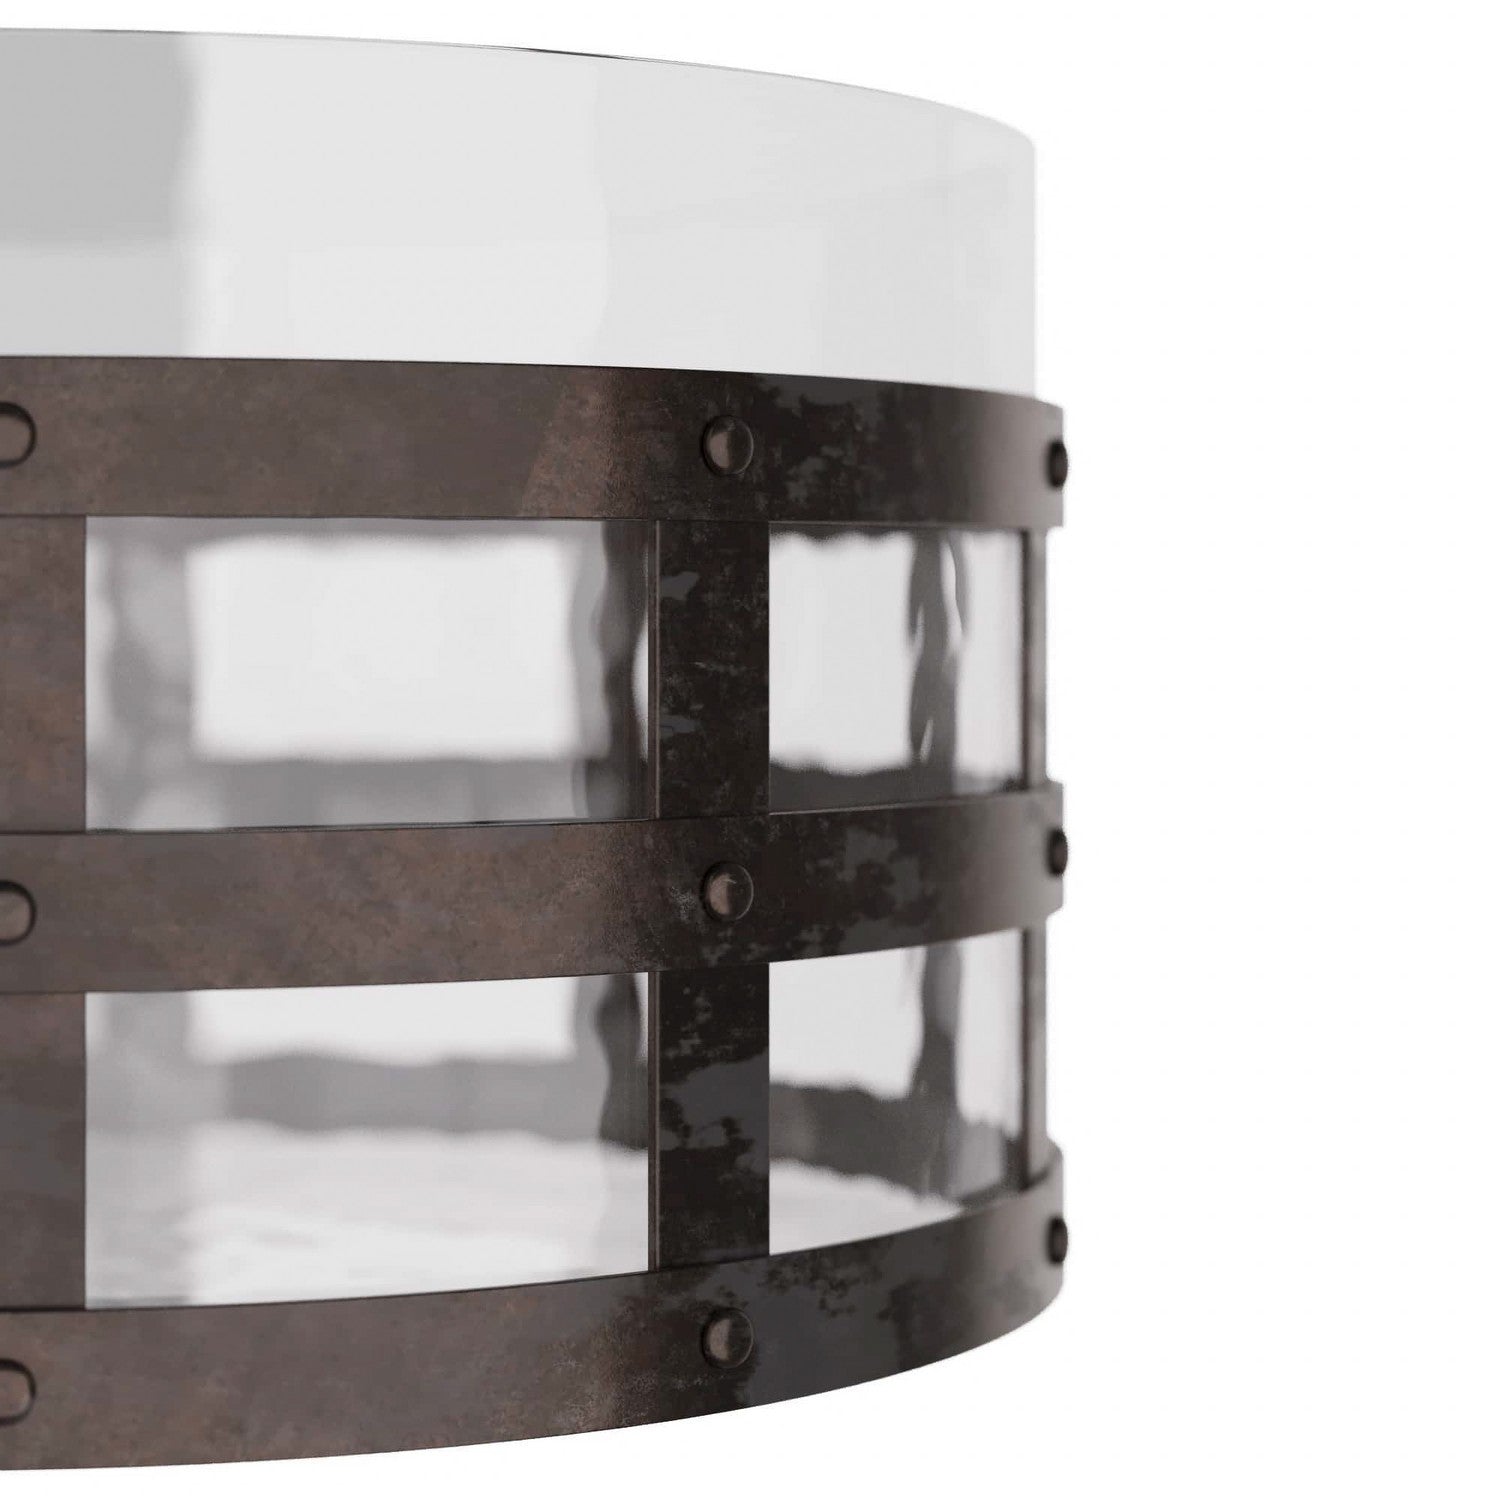 Centerpiece from the Rivet collection in Blackened Iron finish